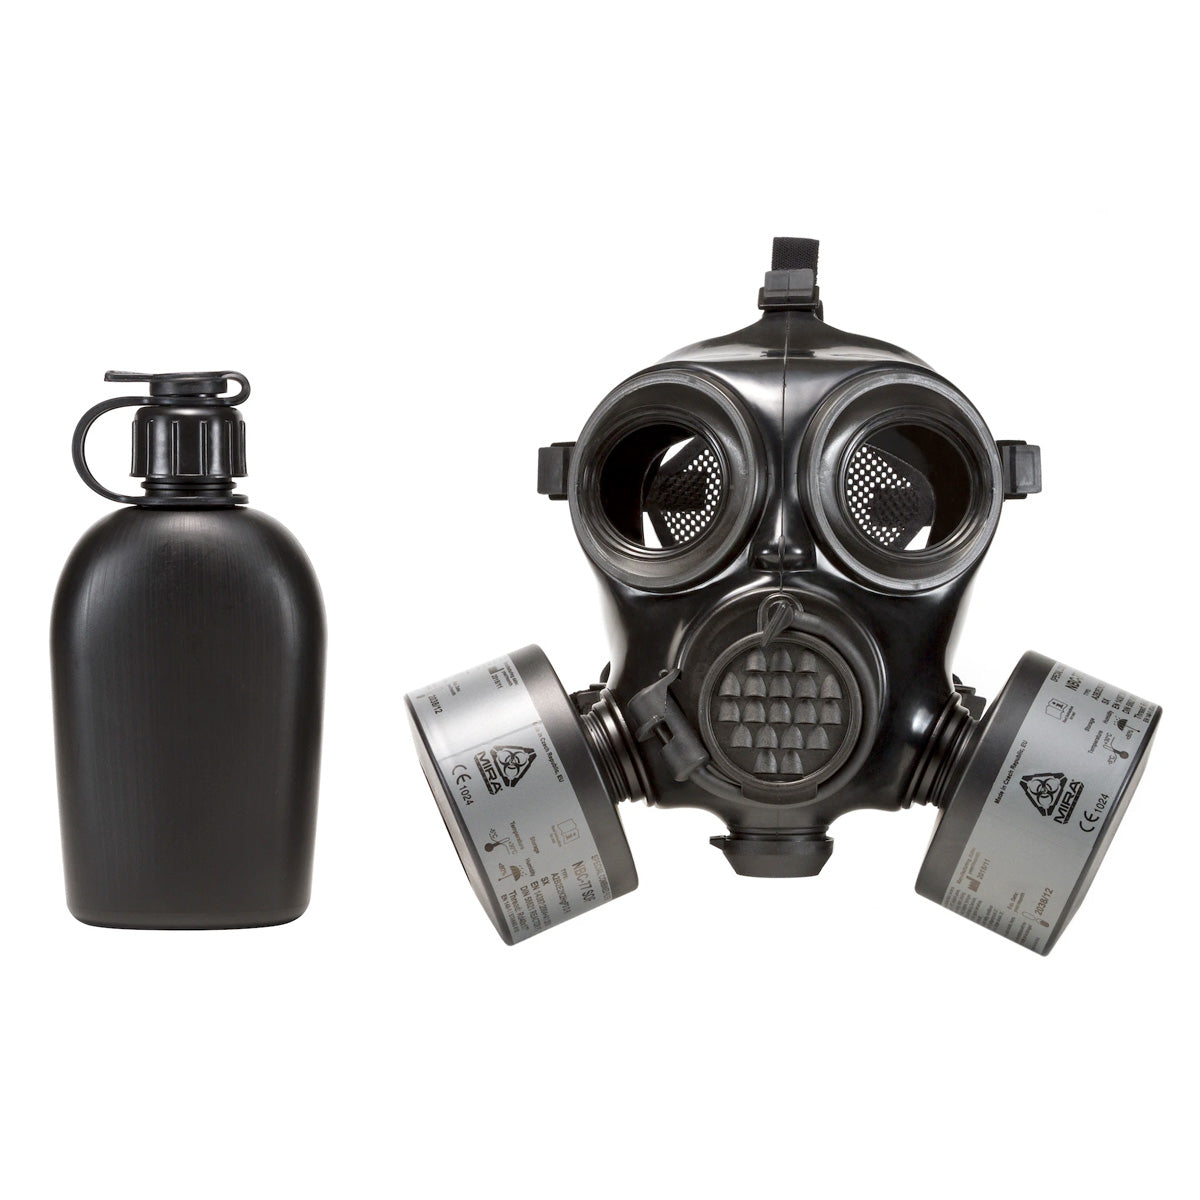 MIRA Safety CM-7M Military Gas Mask CBRN Protection Military Special Forces, Police Squads, and Rescue Teams Protective Gear MIRA Safety Tactical Gear Supplier Tactical Distributors Australia